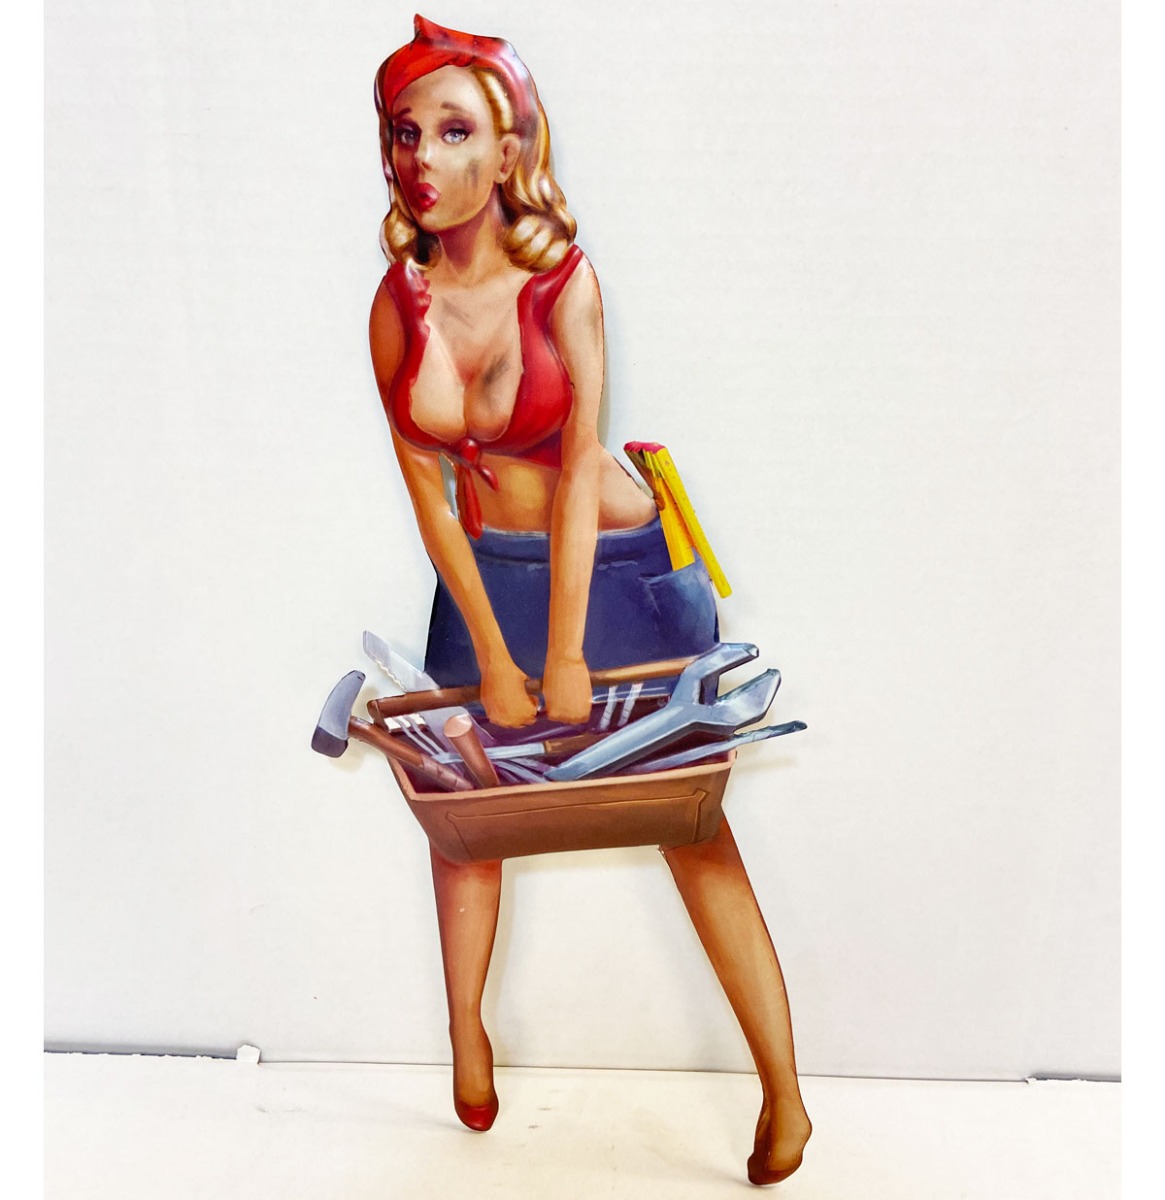 Pin Up With Garage Tools Metaal Bord 14 x 40 cm